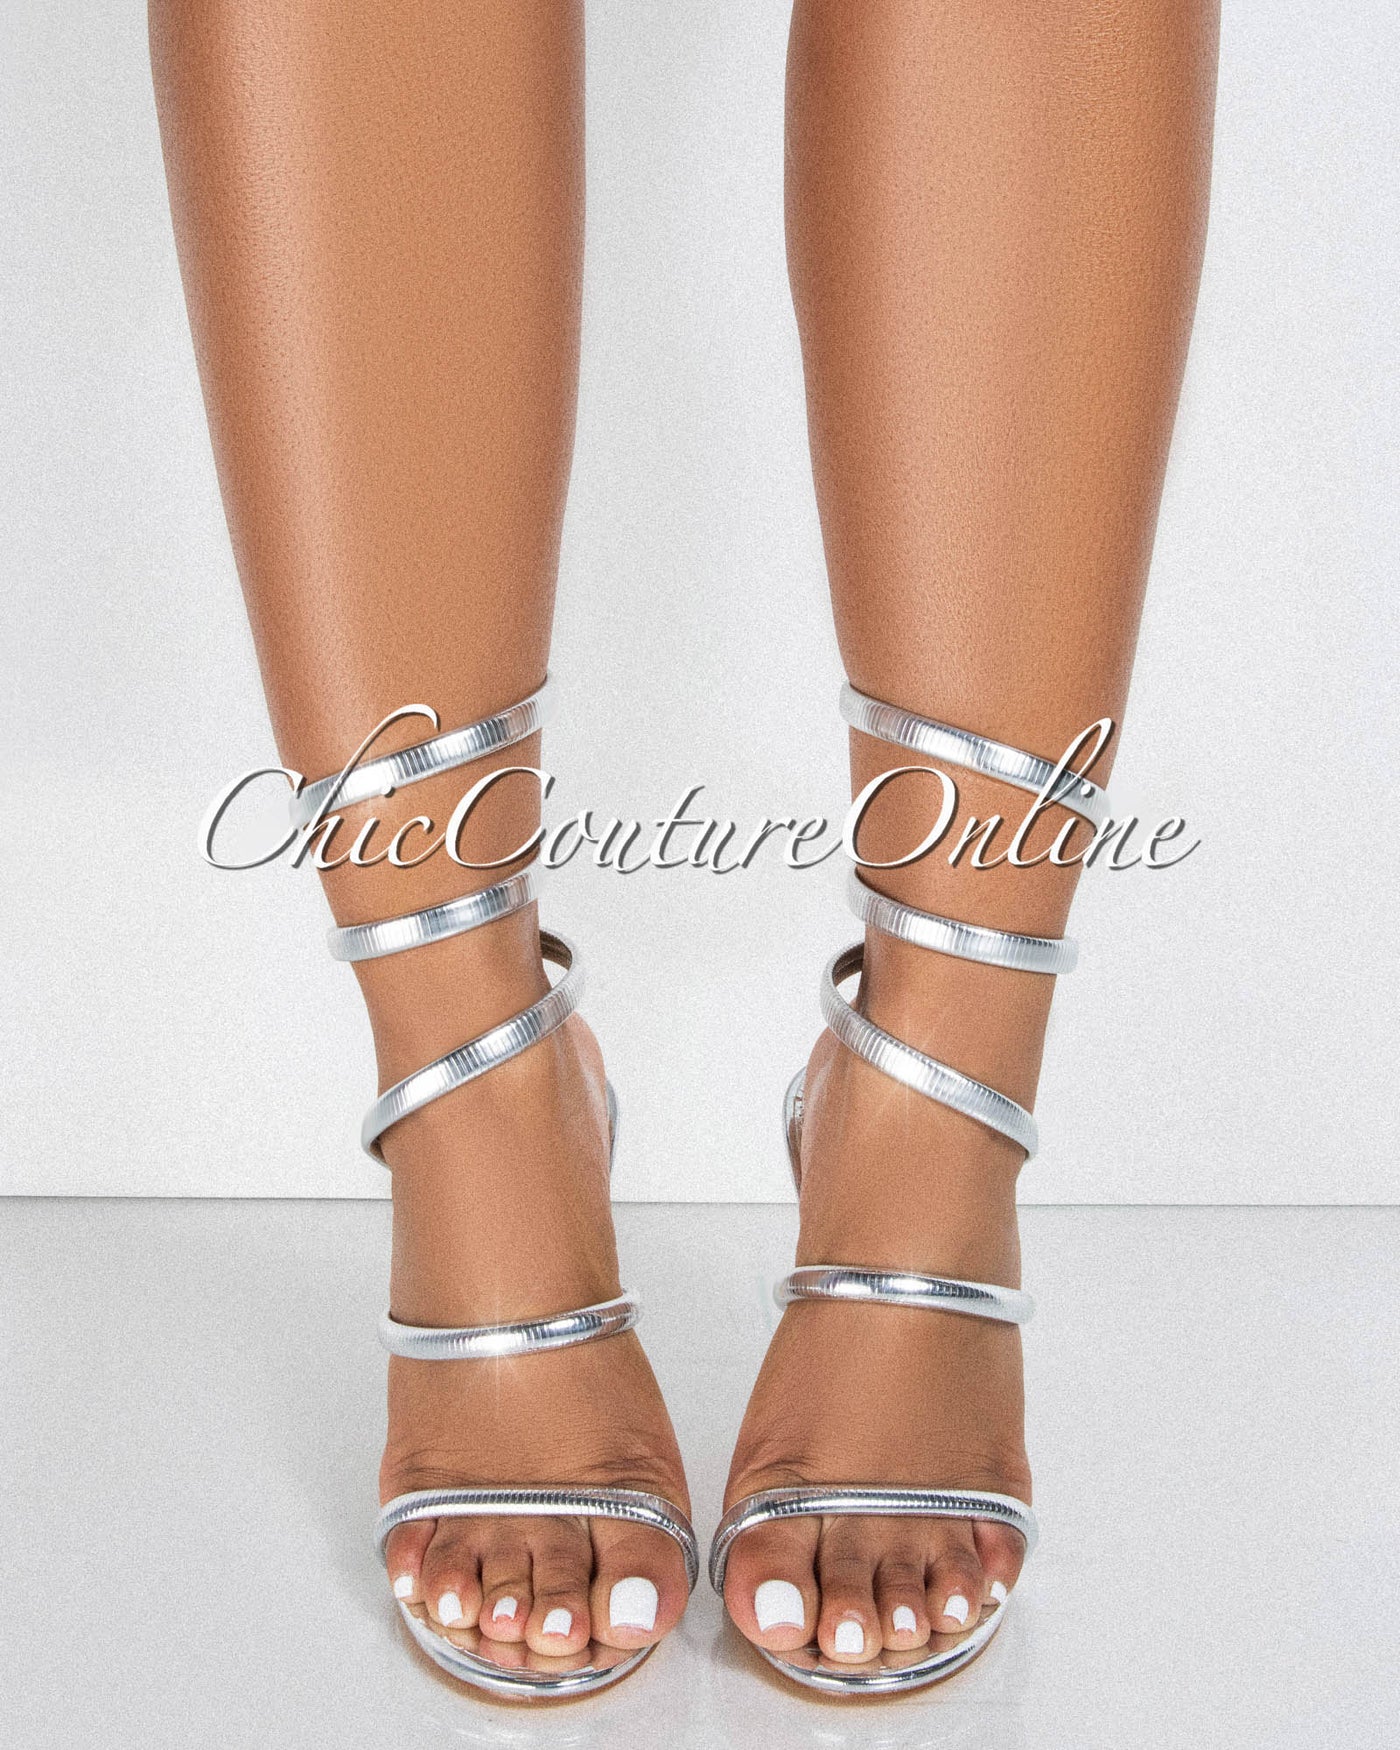 Nikia Silver Snake Ankle High Heels Sandals